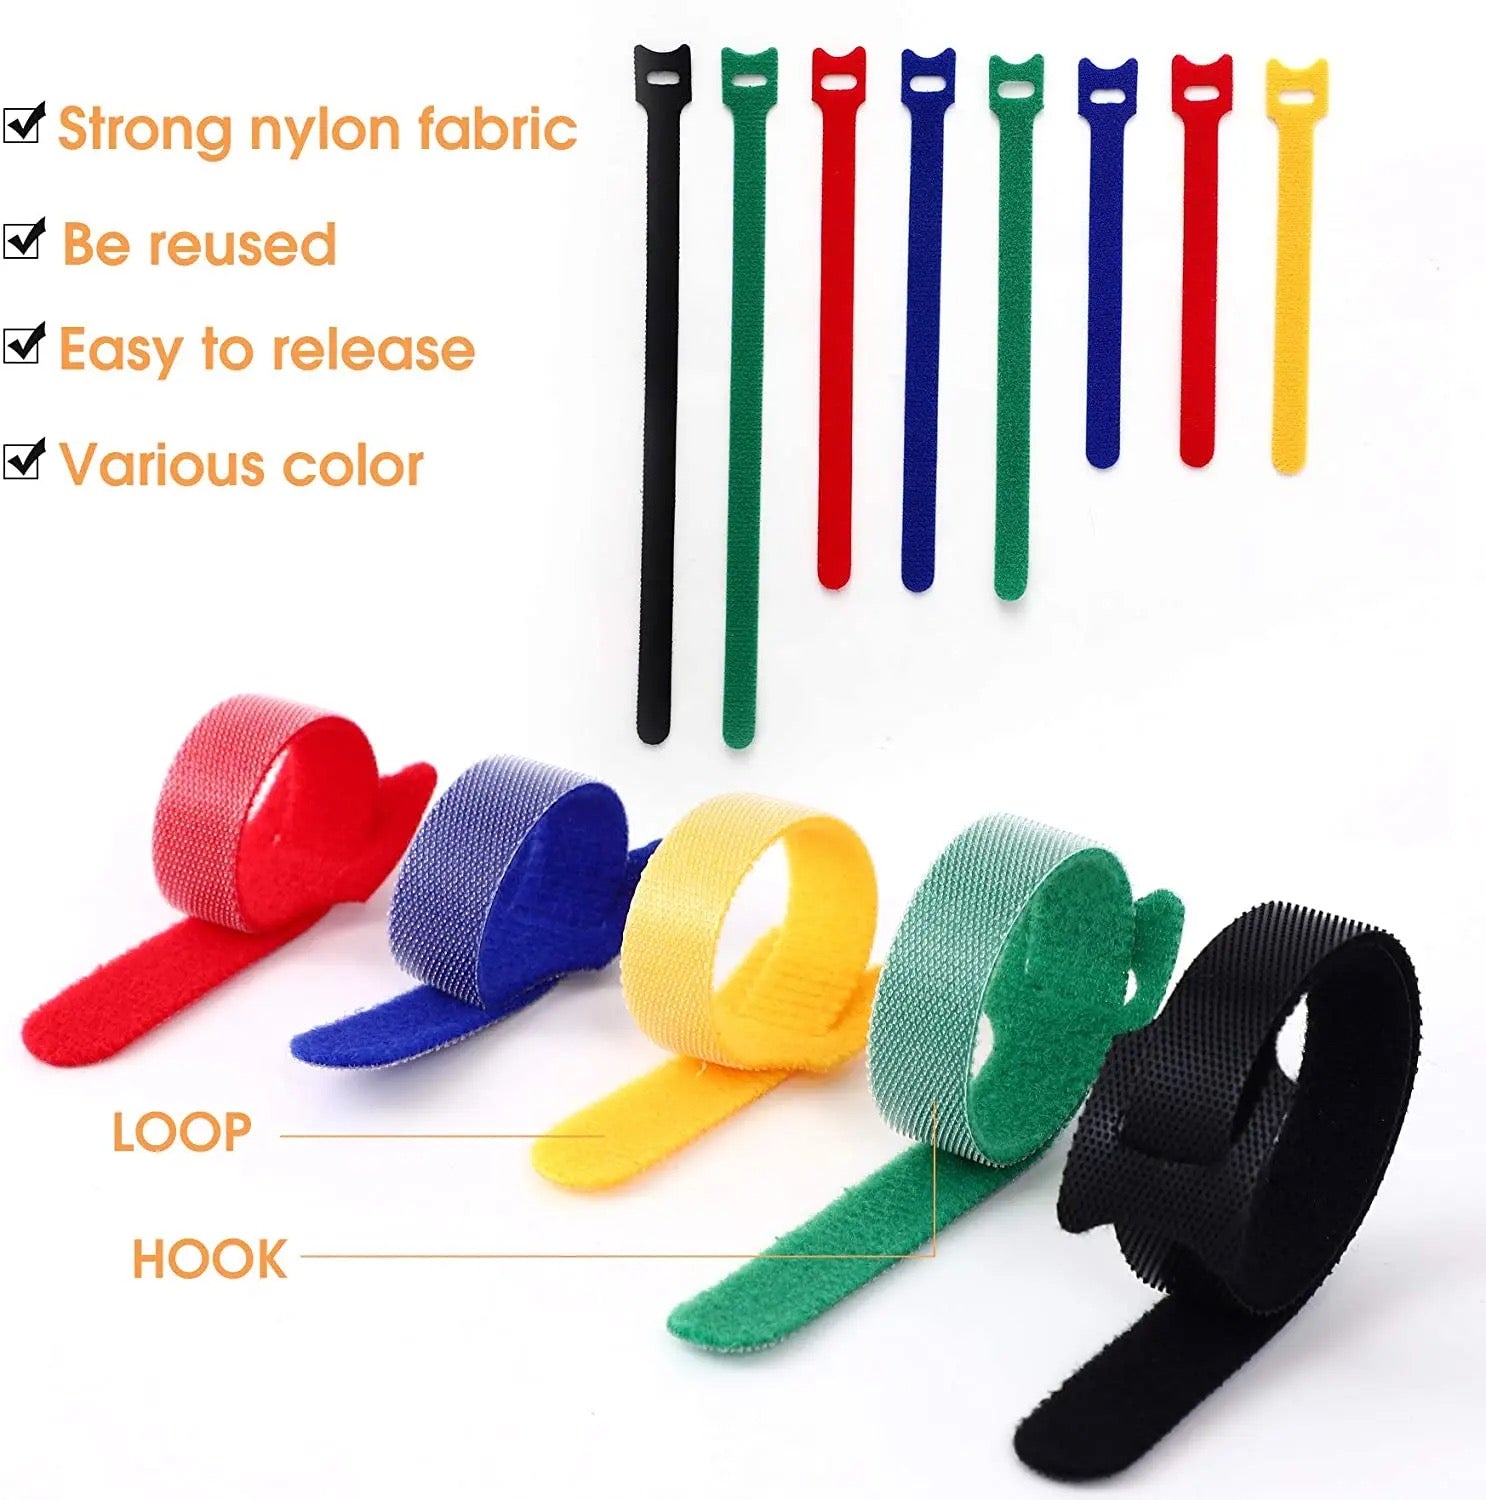 Reusable Wire and Cable Ties Strap - Product features 